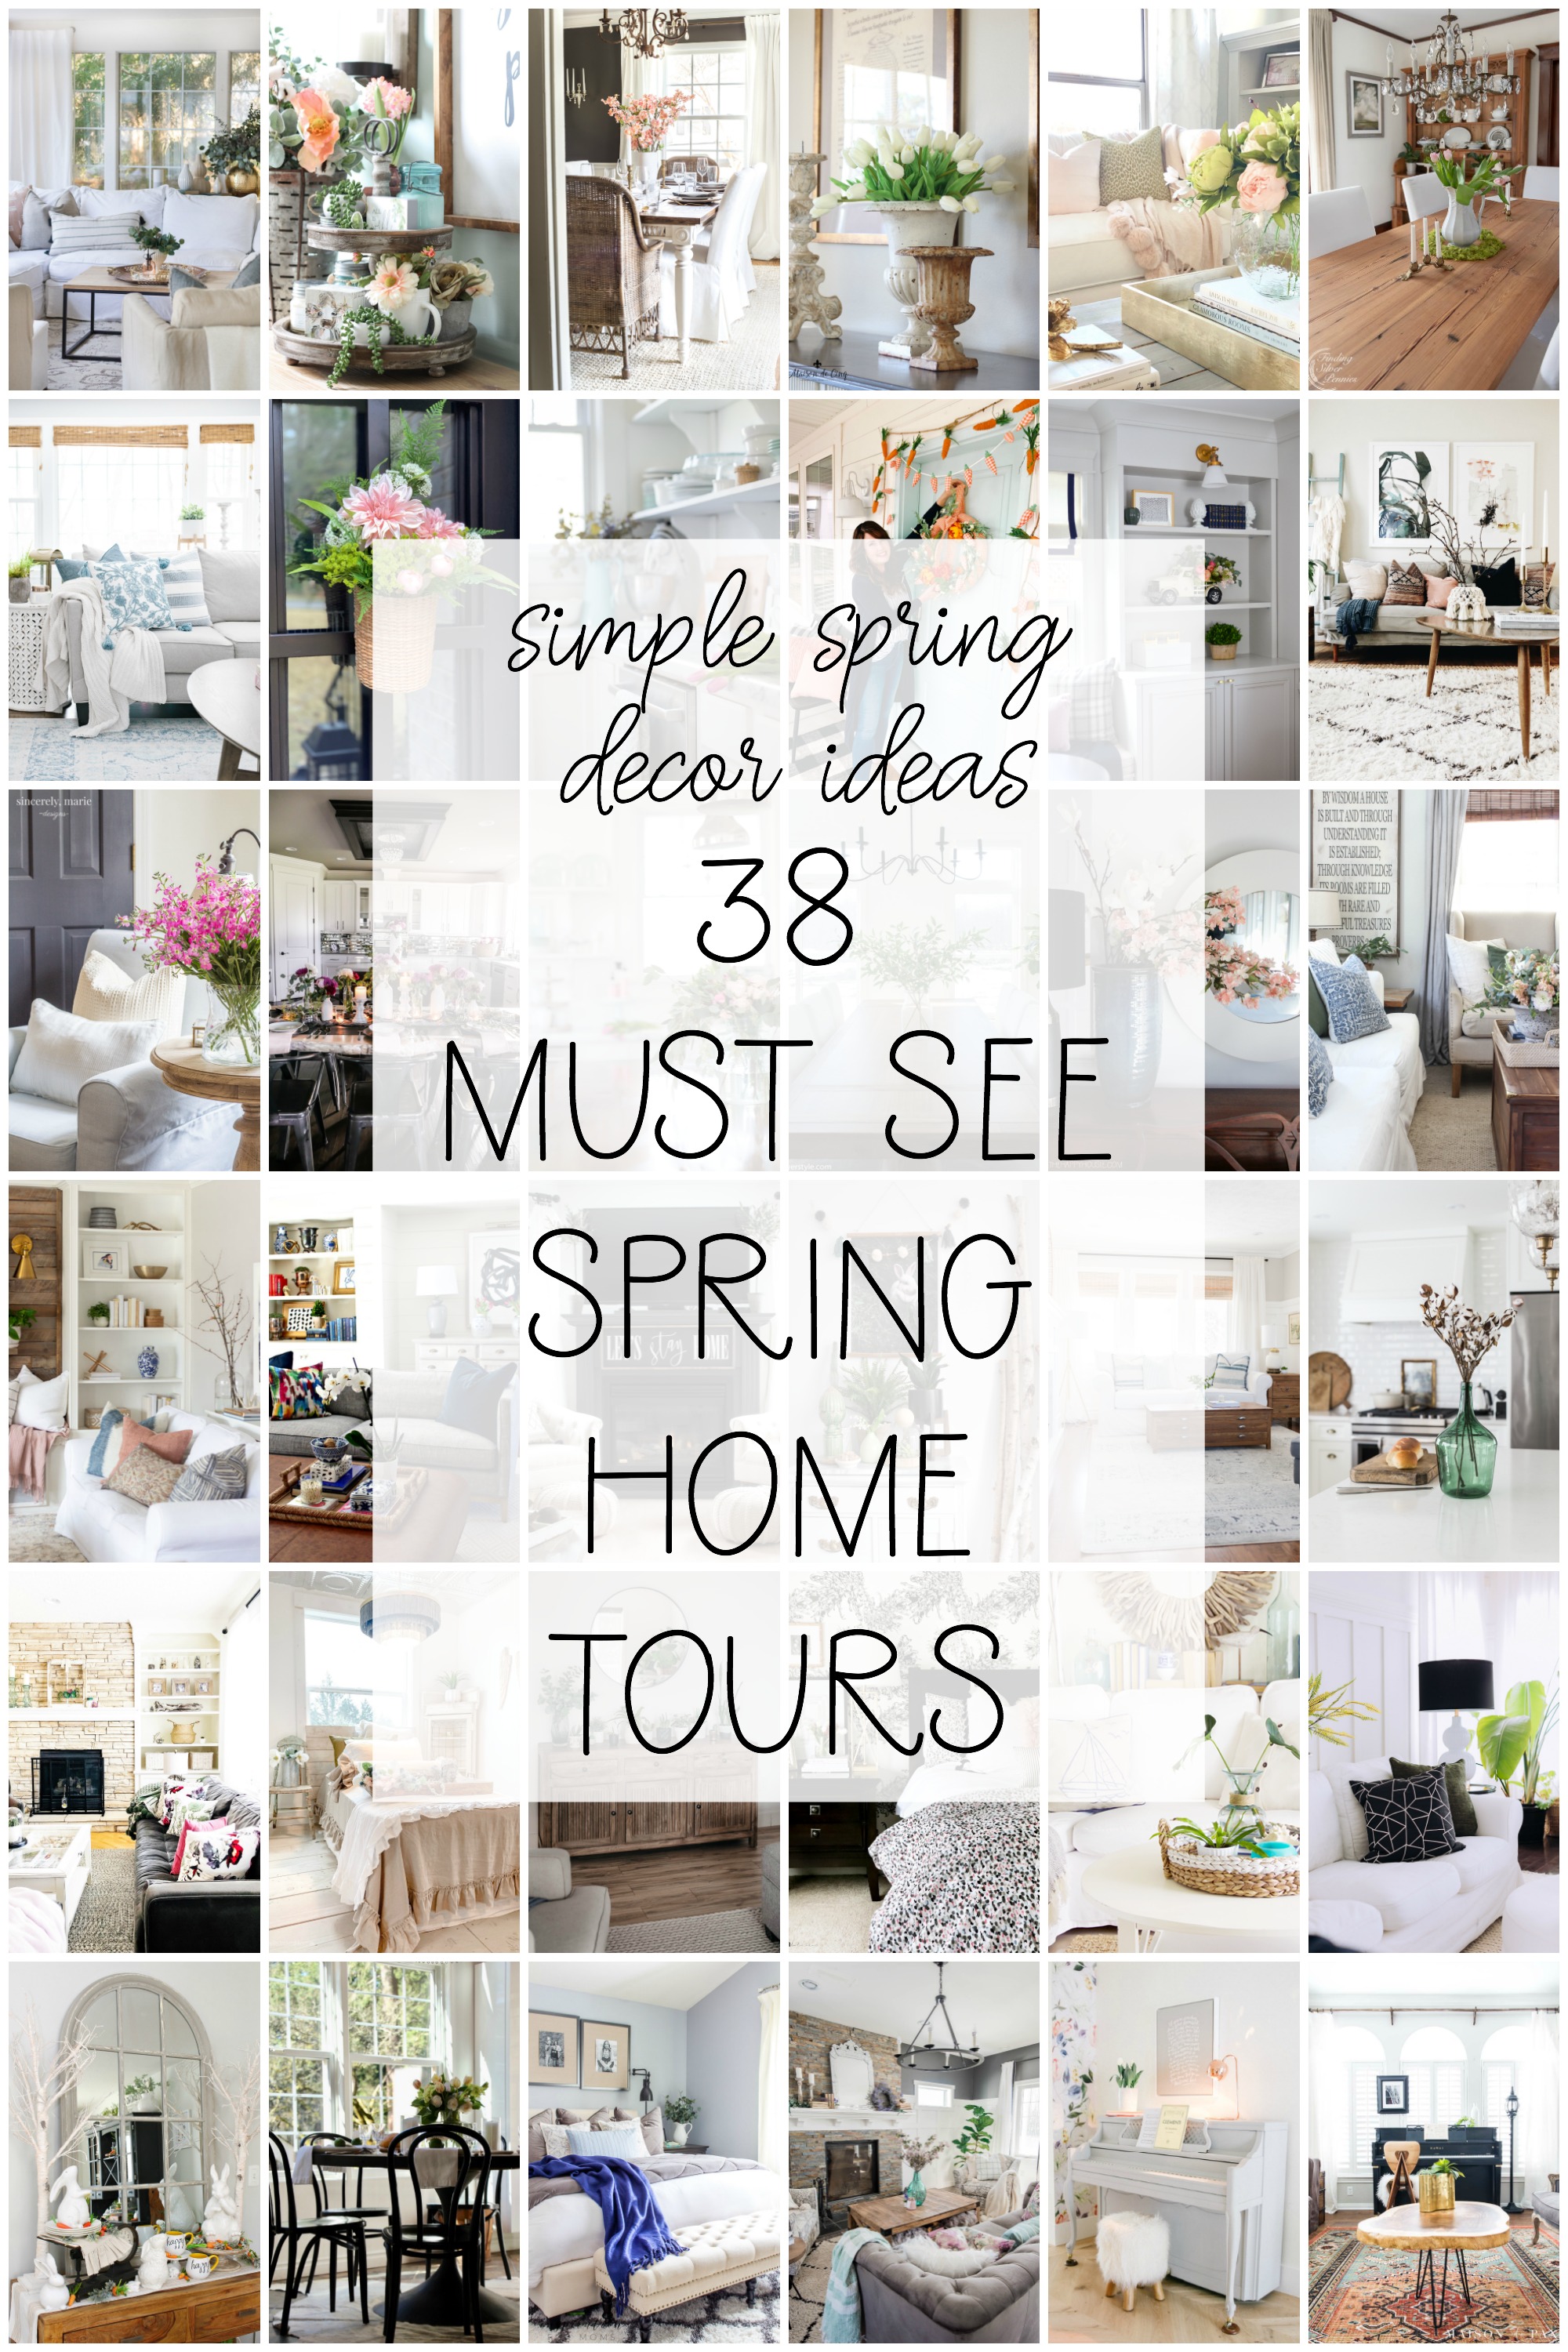 38 Must See Spring Home Tours graphic.